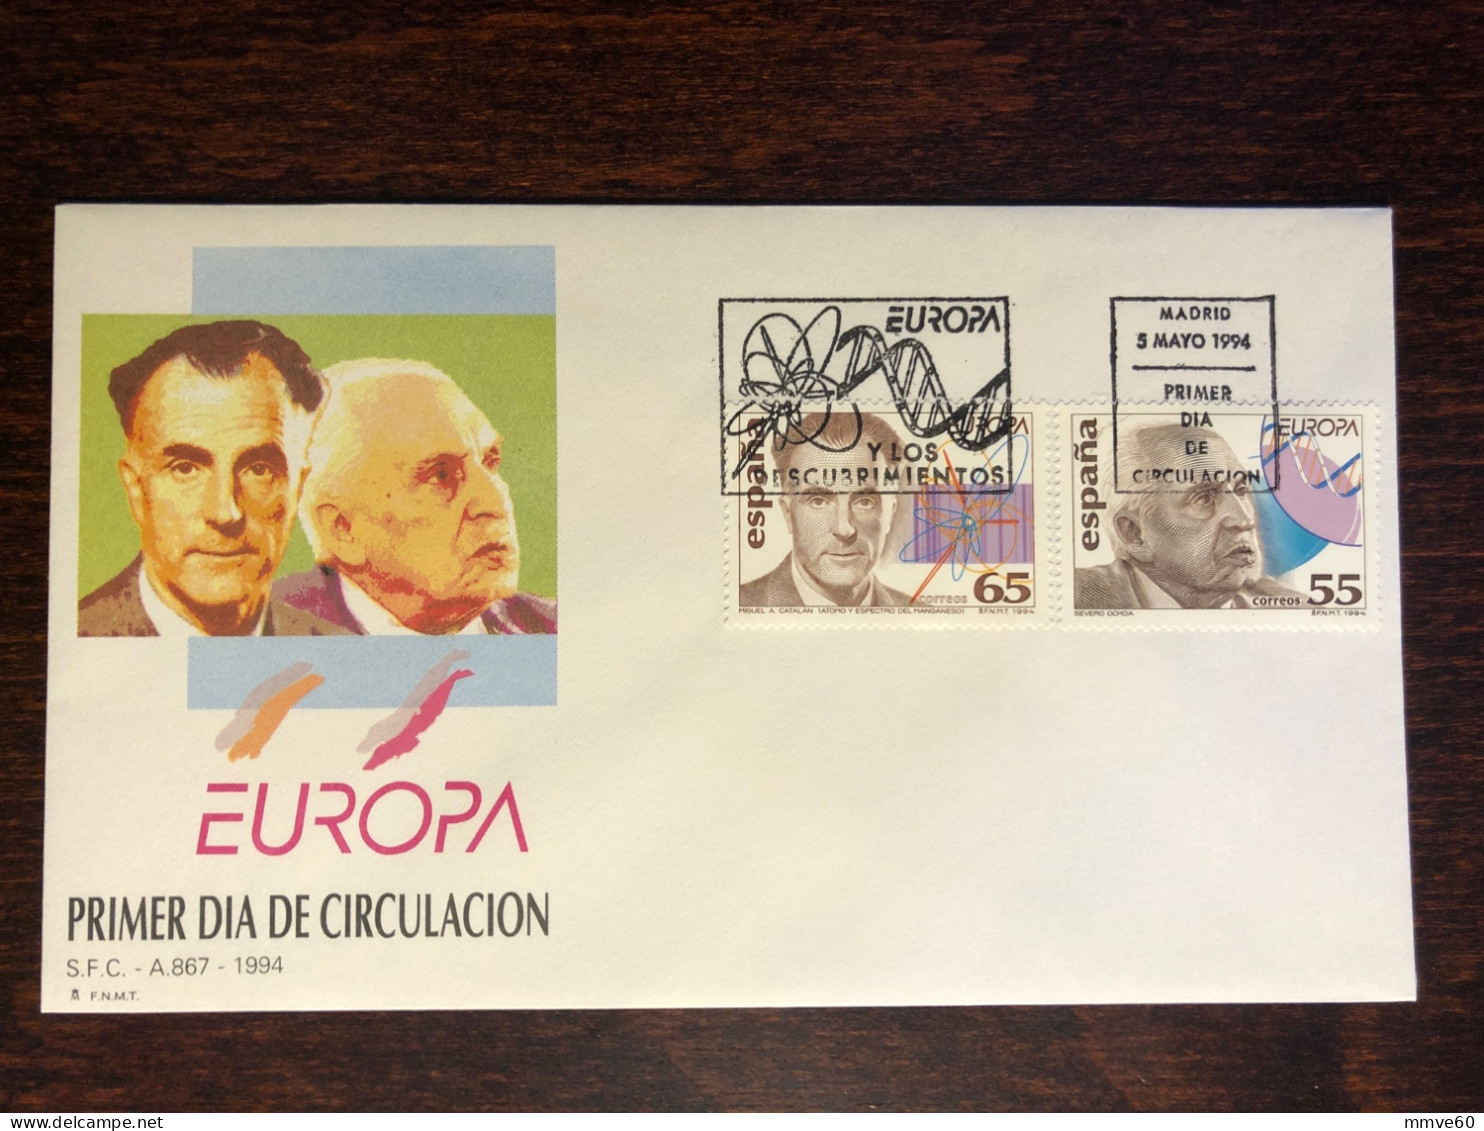 SPAIN FDC COVER 1994 YEAR DOCTOR OCHOA GENETK HEALTH MEDICINE STAMPS - FDC